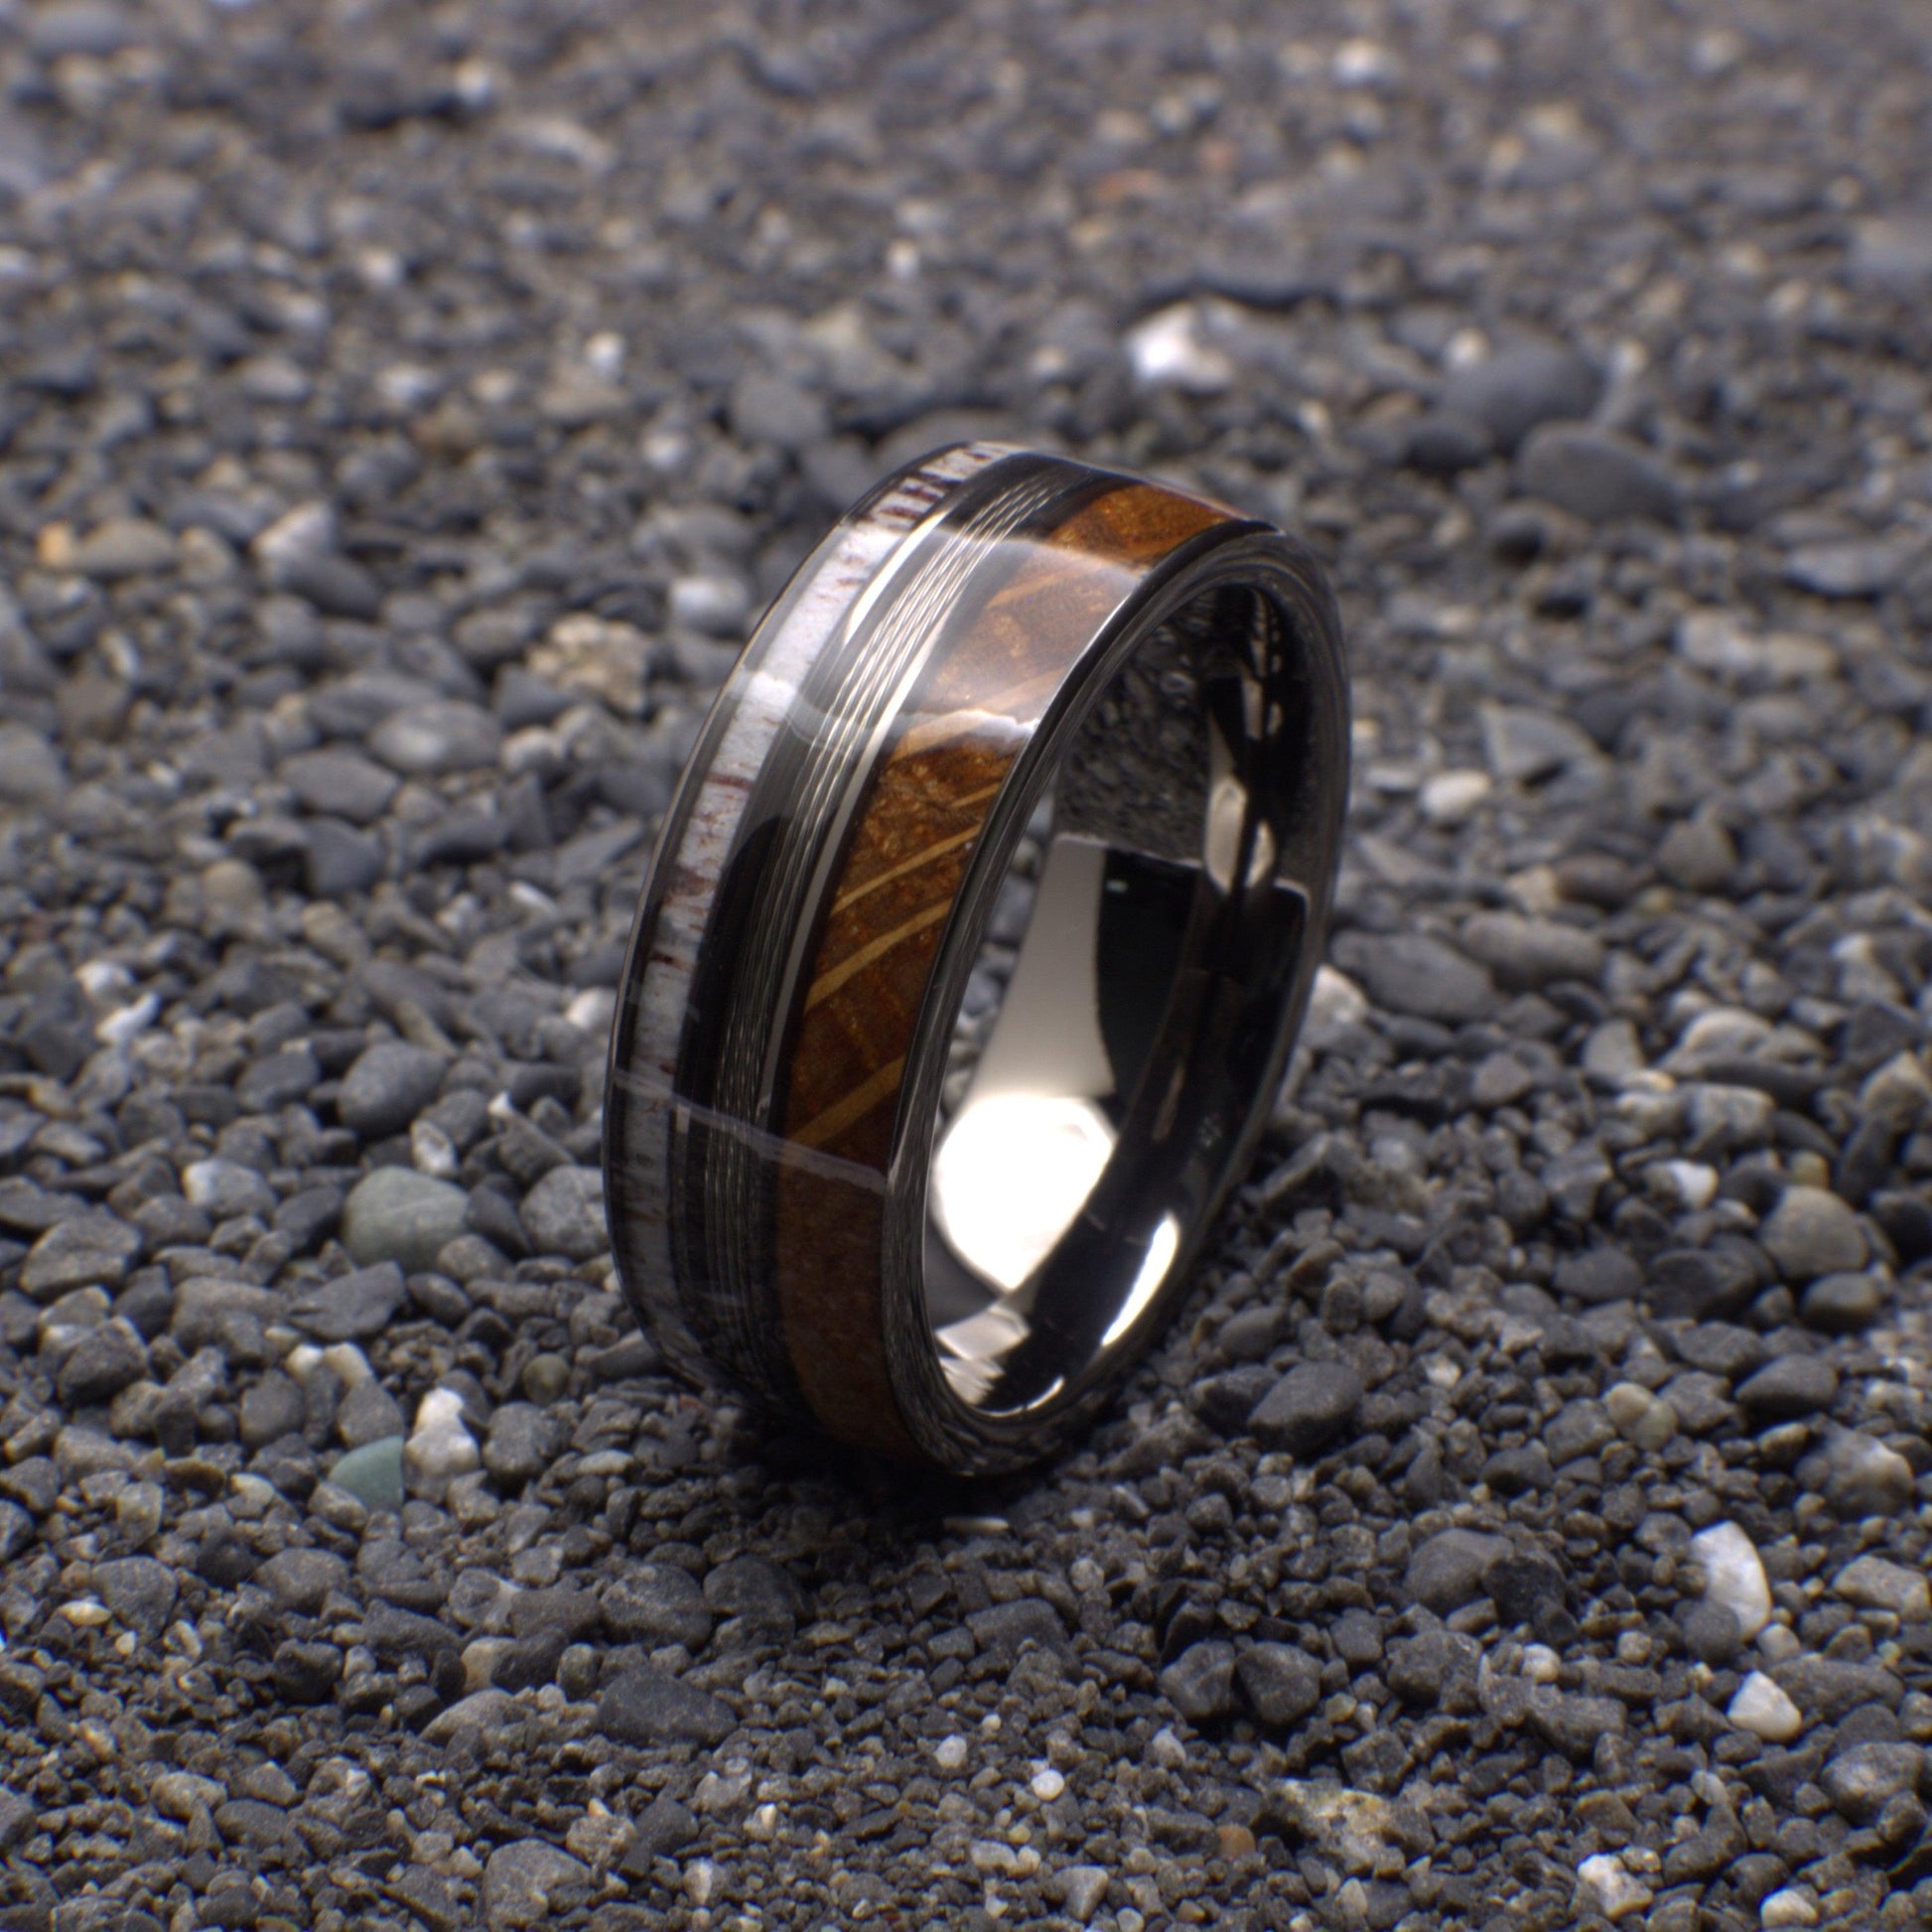 Mens Wedding Band, Whiskey Barrel Wedding Ring with Silver Fishing Line and Antler, Fishing Ring, Antler Ring, Men's Wedding Band